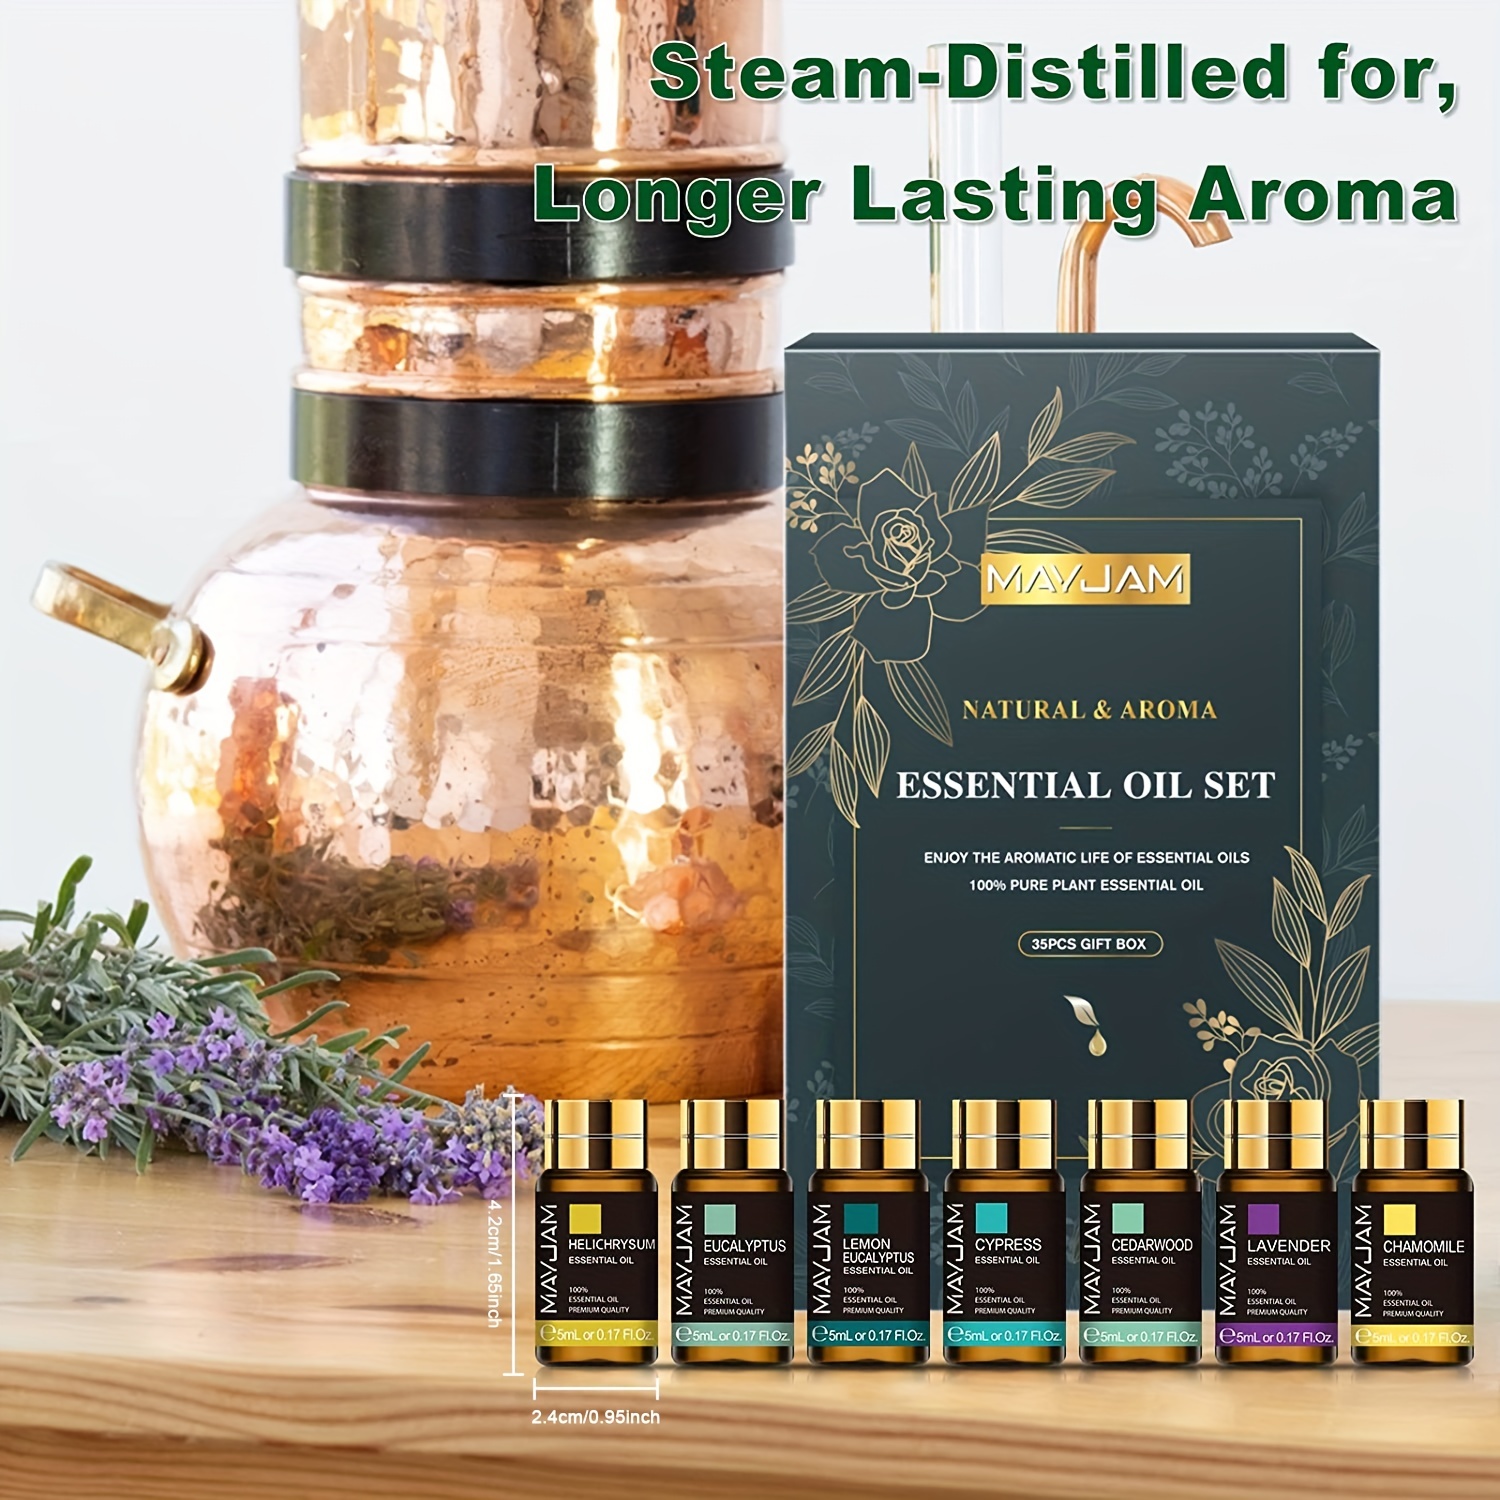 Essential Oils Top 6 Gift Set Pure Essential Oils for Diffuser, Humidifier,  Massage, Aromatherapy